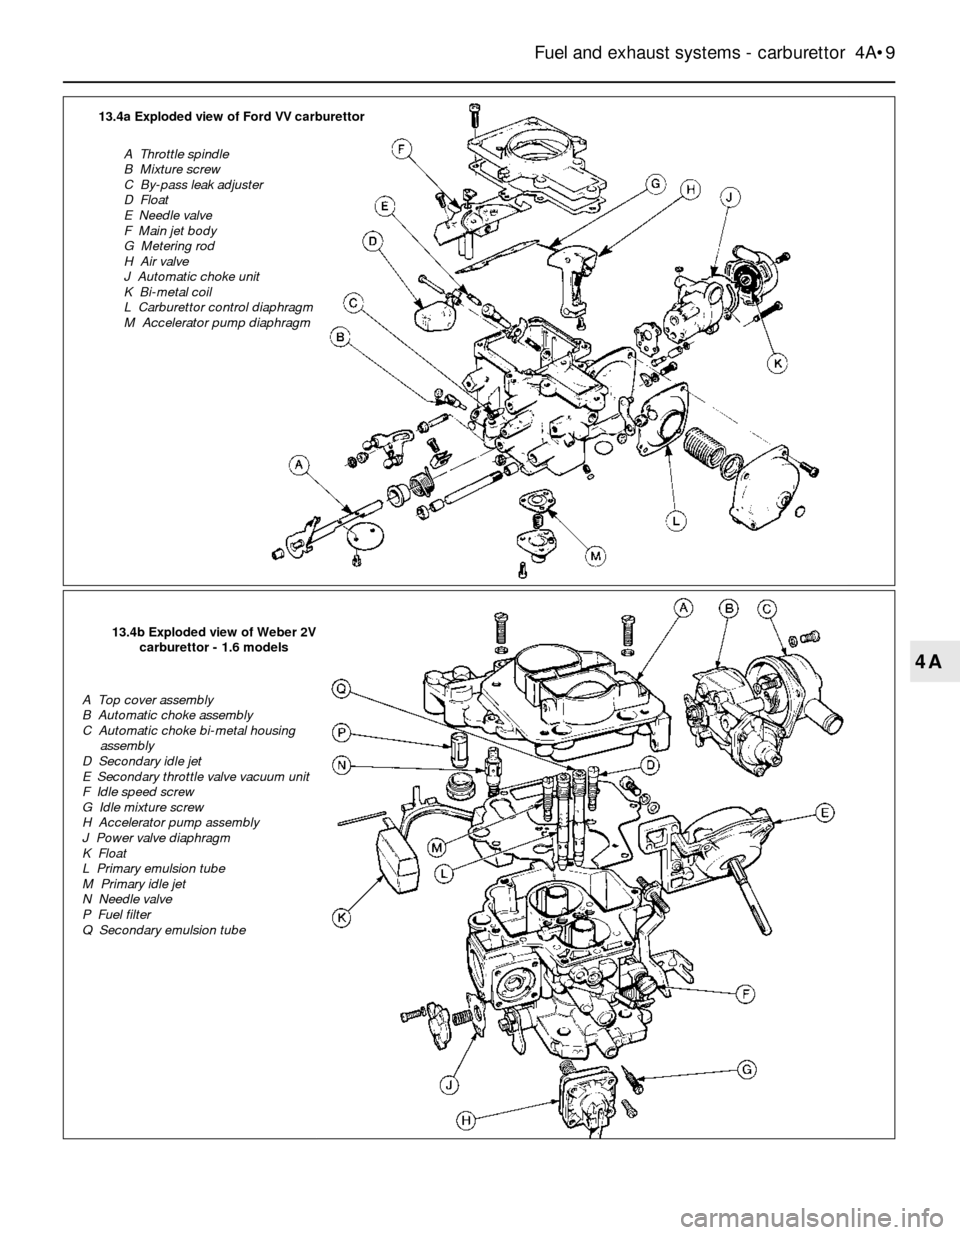 FORD SIERRA 1991 2.G Fuel And Exhaust Systems Carburettor Workshop Manual Fuel and exhaust systems - carburettor  4A•9
4A
13.4a Exploded view of Ford VV carburettor
A  Throttle spindle
B  Mixture screw
C  By-pass leak adjuster
D  Float
E  Needle valve
F  Main jet body
G  